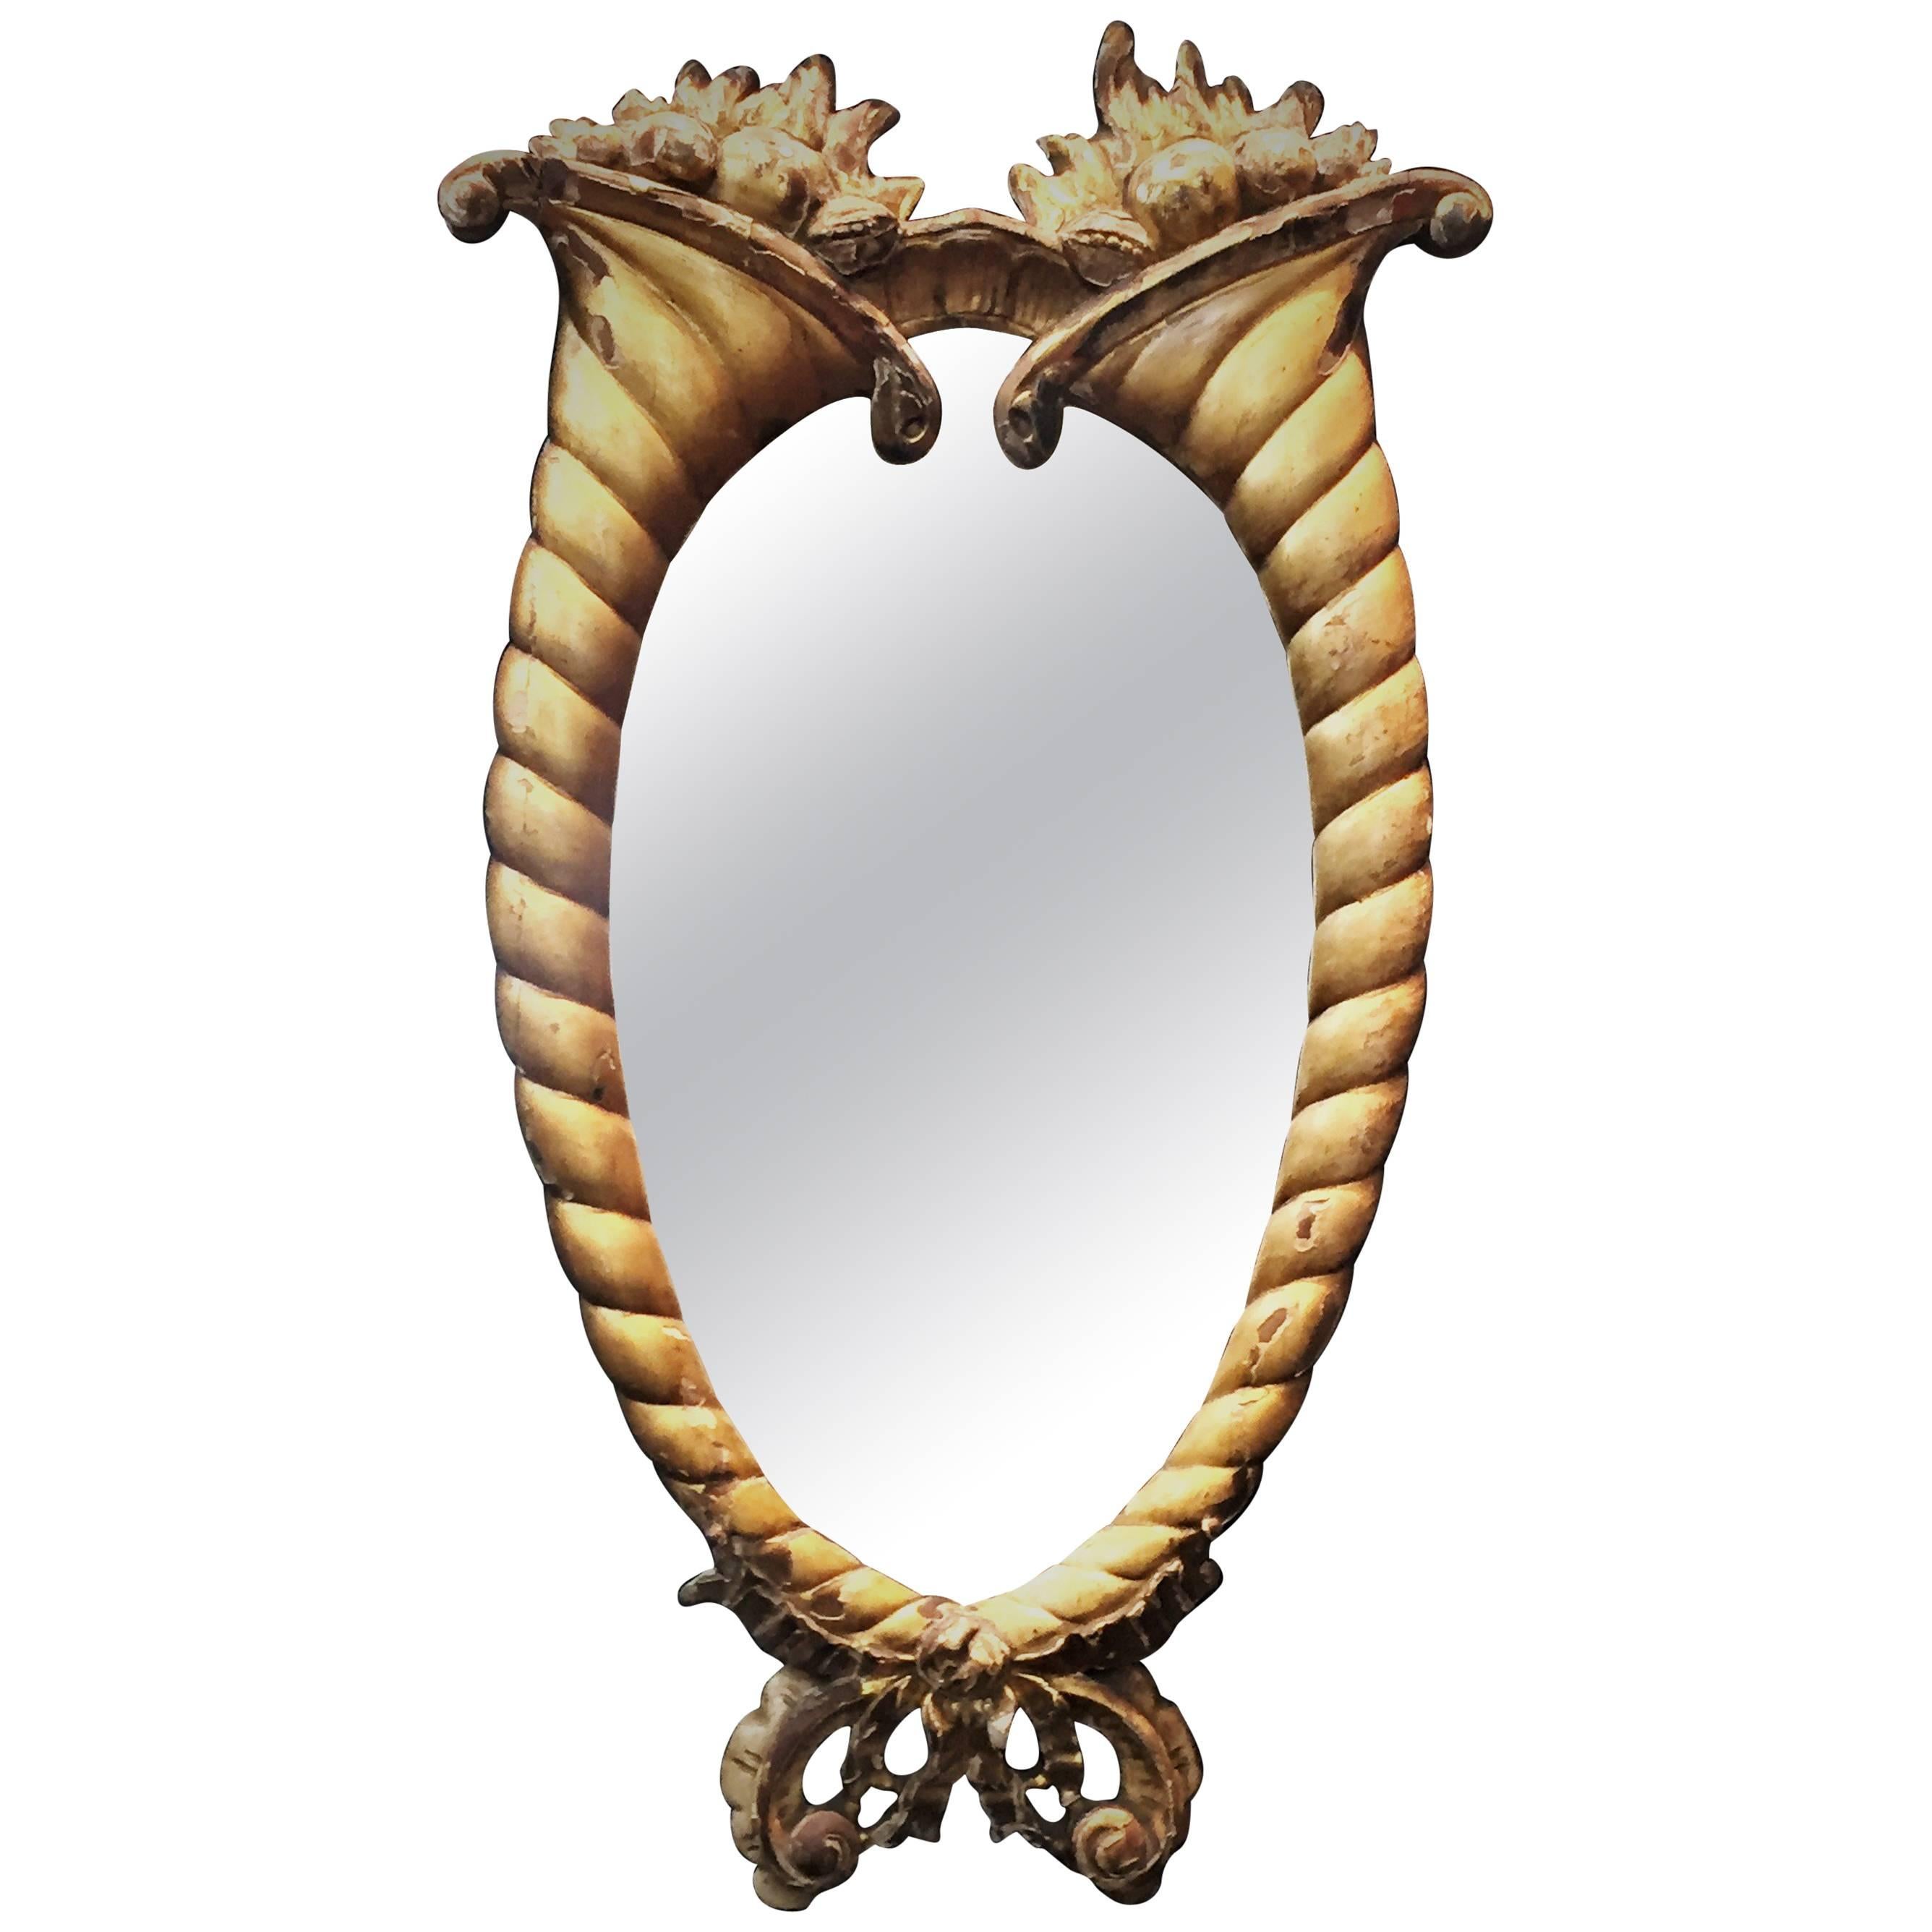 French Belle Époque Mirror in Hand-Carved Gilded Wood Frame, circa 1875-1914